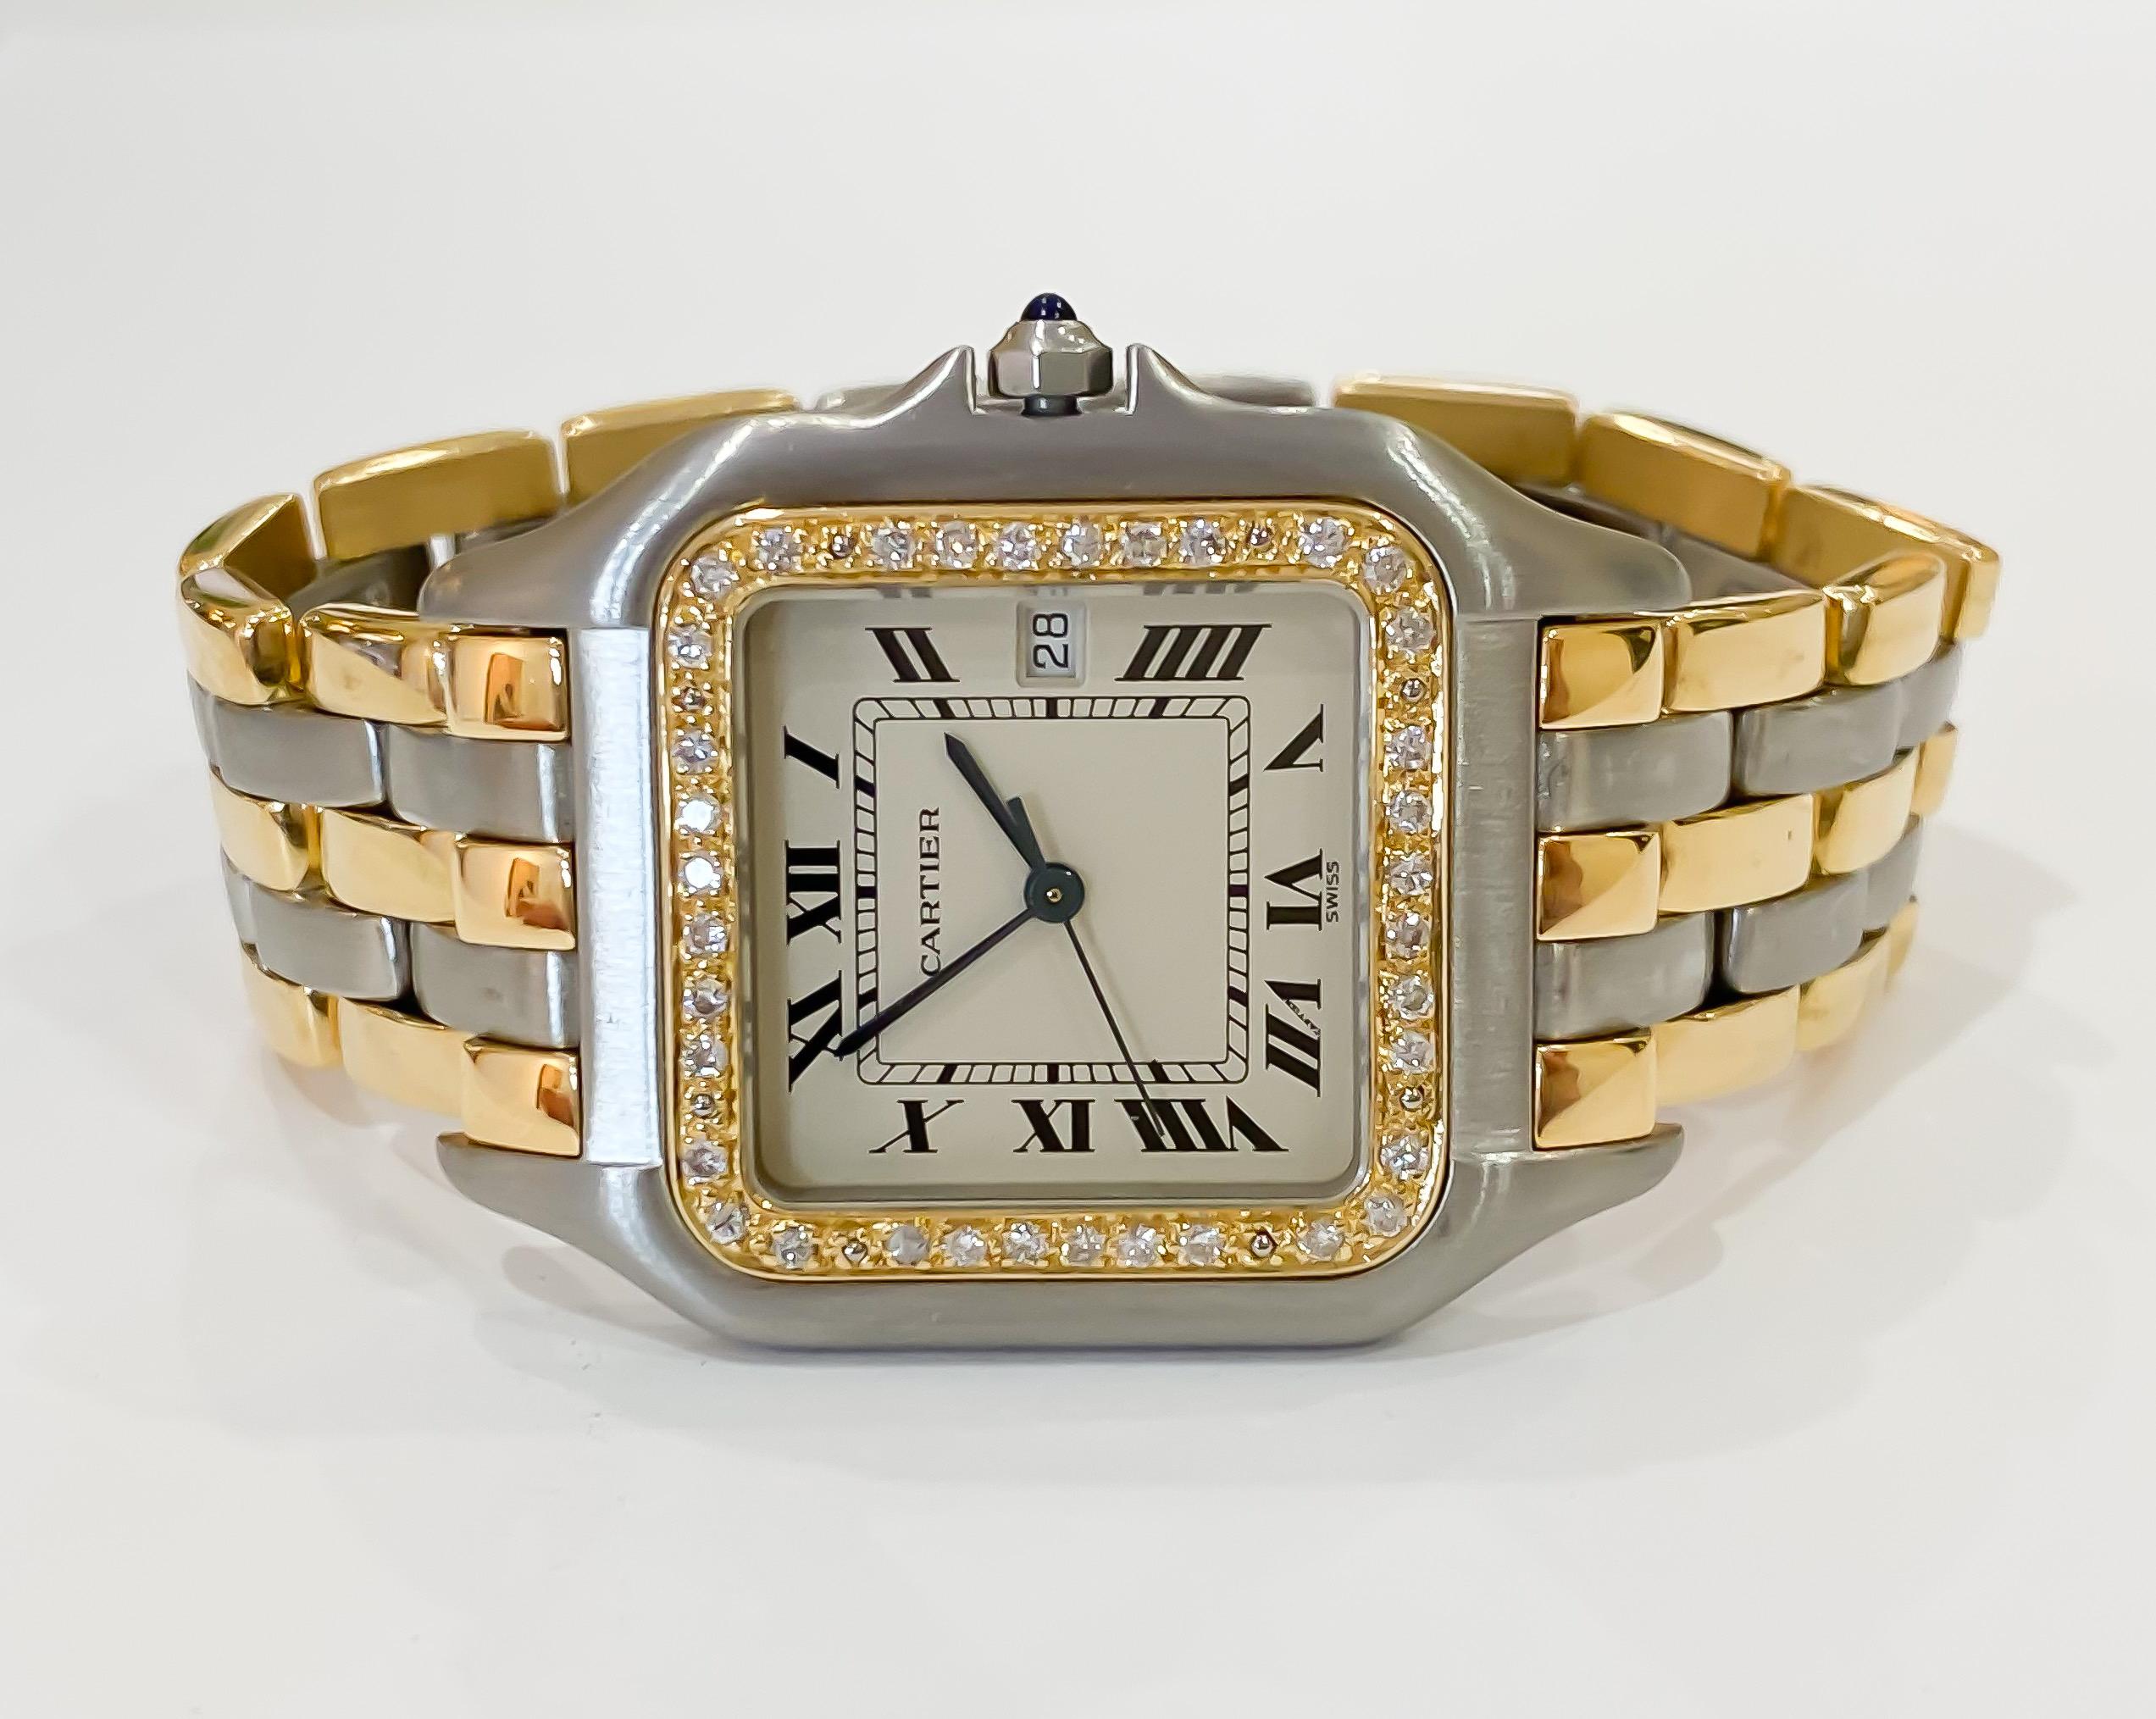 Cartier Jumbo Panthere Three Row Steel & 18K Yellow Gold Diamond Bezel w/Date

•SERIAL NO: 1879** ***** (EDITED IN PICTURES)
•MOVEMENT: BATTERY QUARTZ
•CASE MATERIAL: STAINLESS STEEL & 18 KARAT YELLOW GOLD
•CONDITION: LIKE NEW EXCELLENT